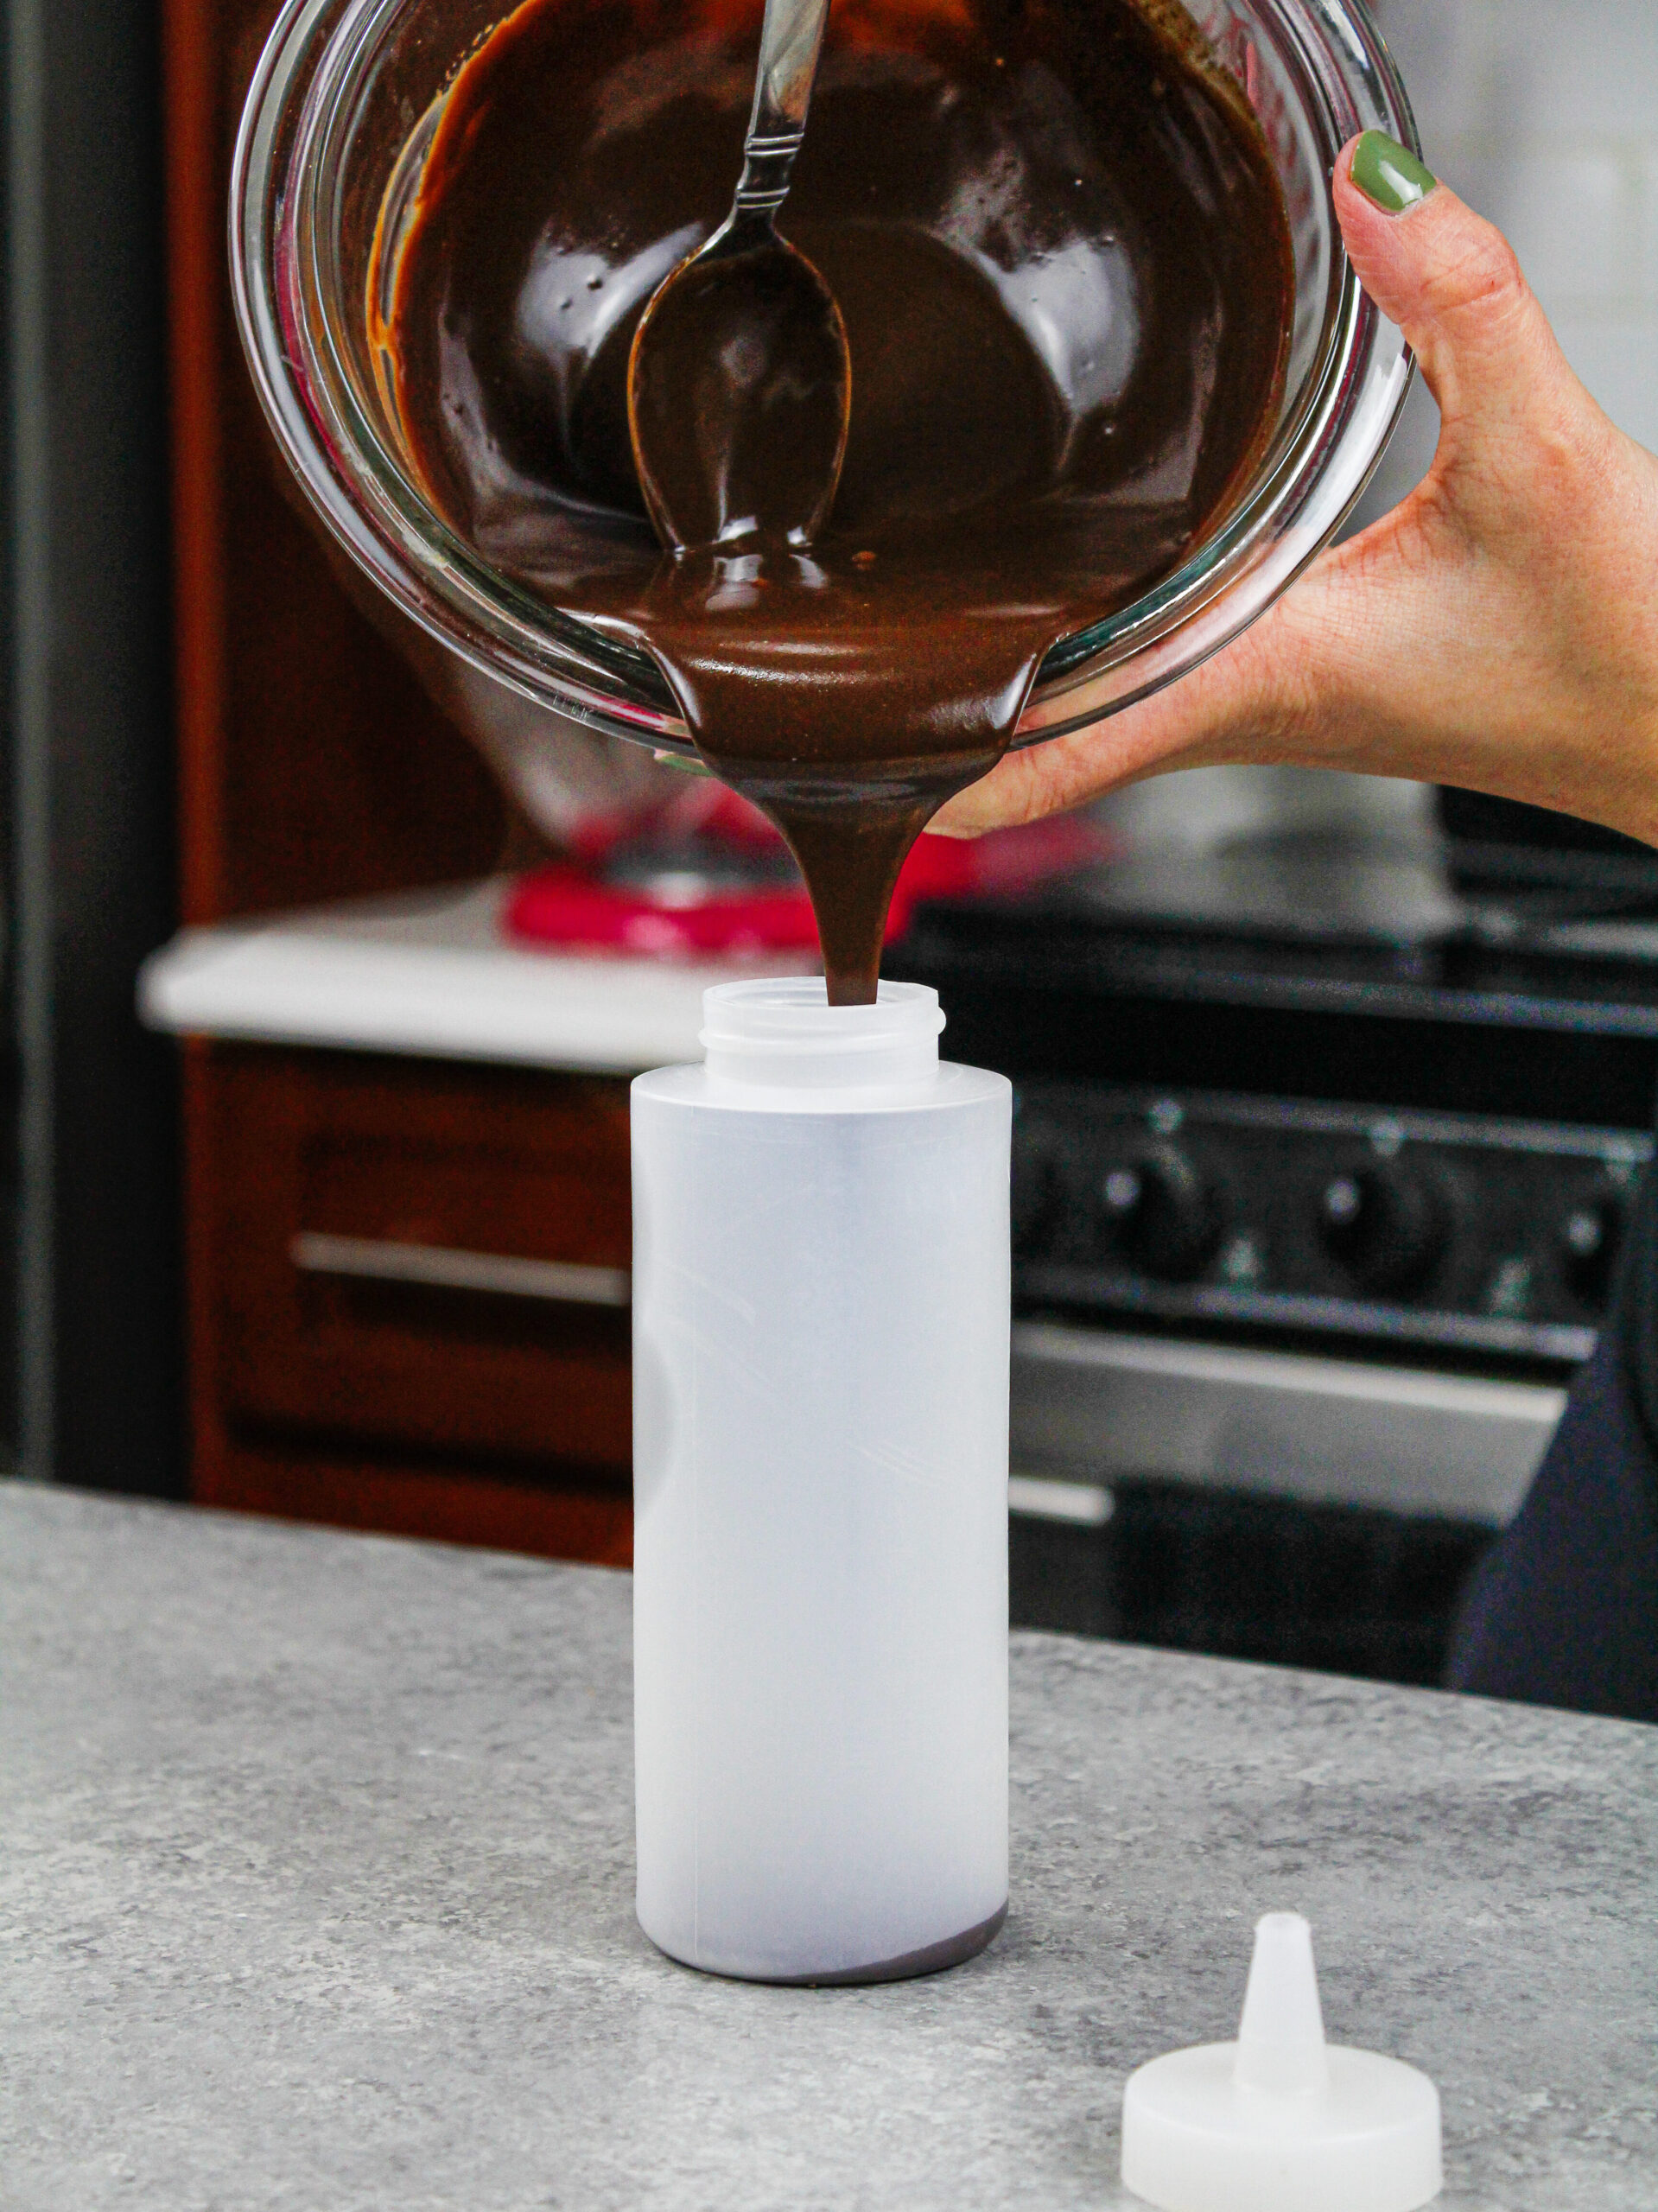 image of chocolate ganache being poured into a plastic squirt bottle to add drips to a cake